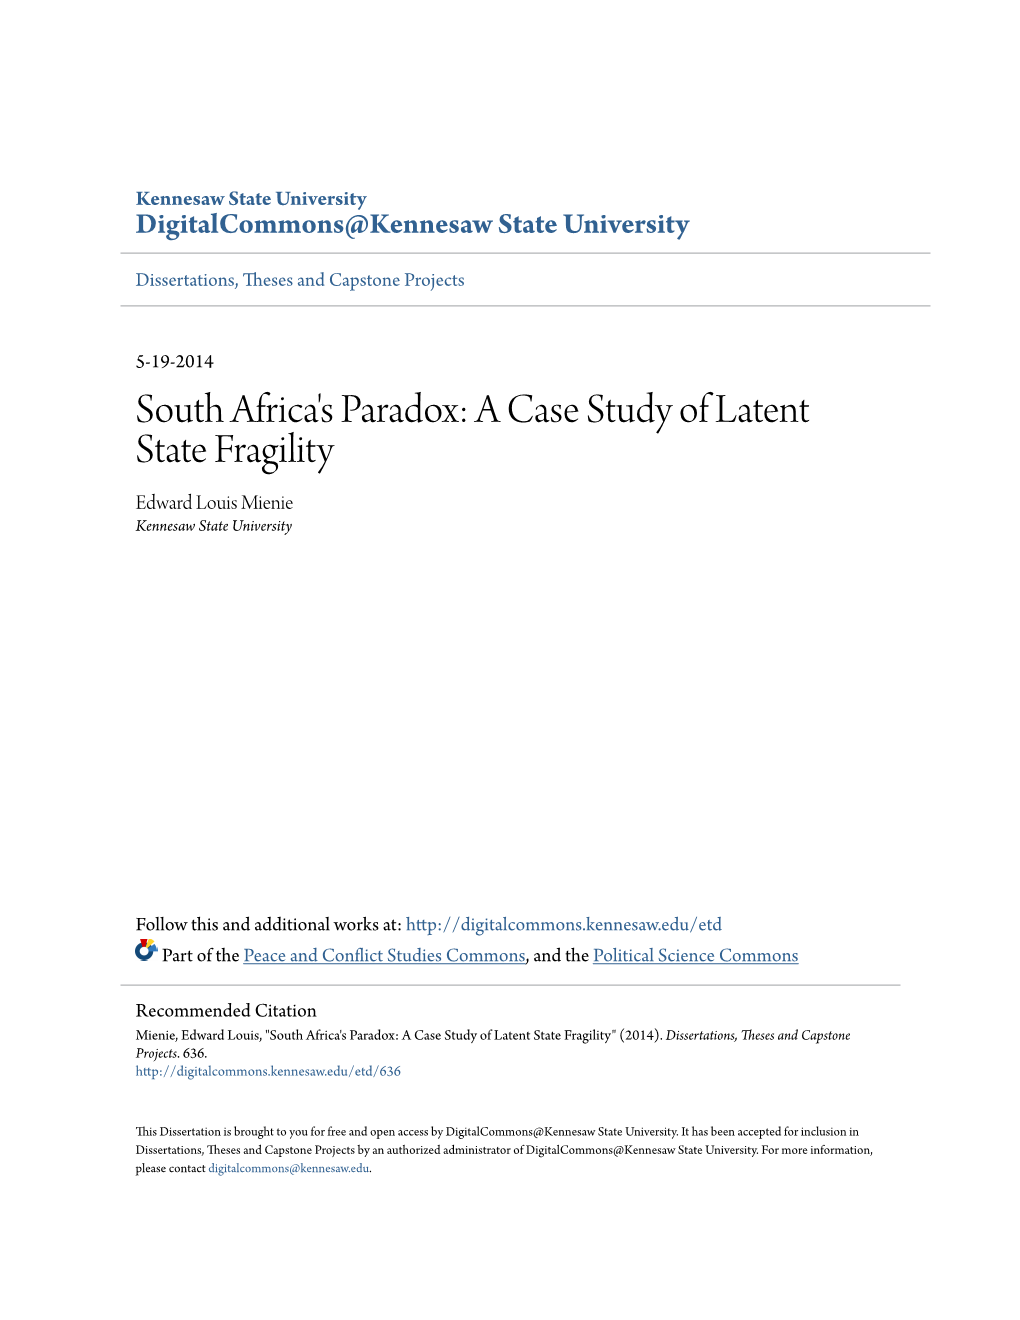 A Case Study of Latent State Fragility Edward Louis Mienie Kennesaw State University